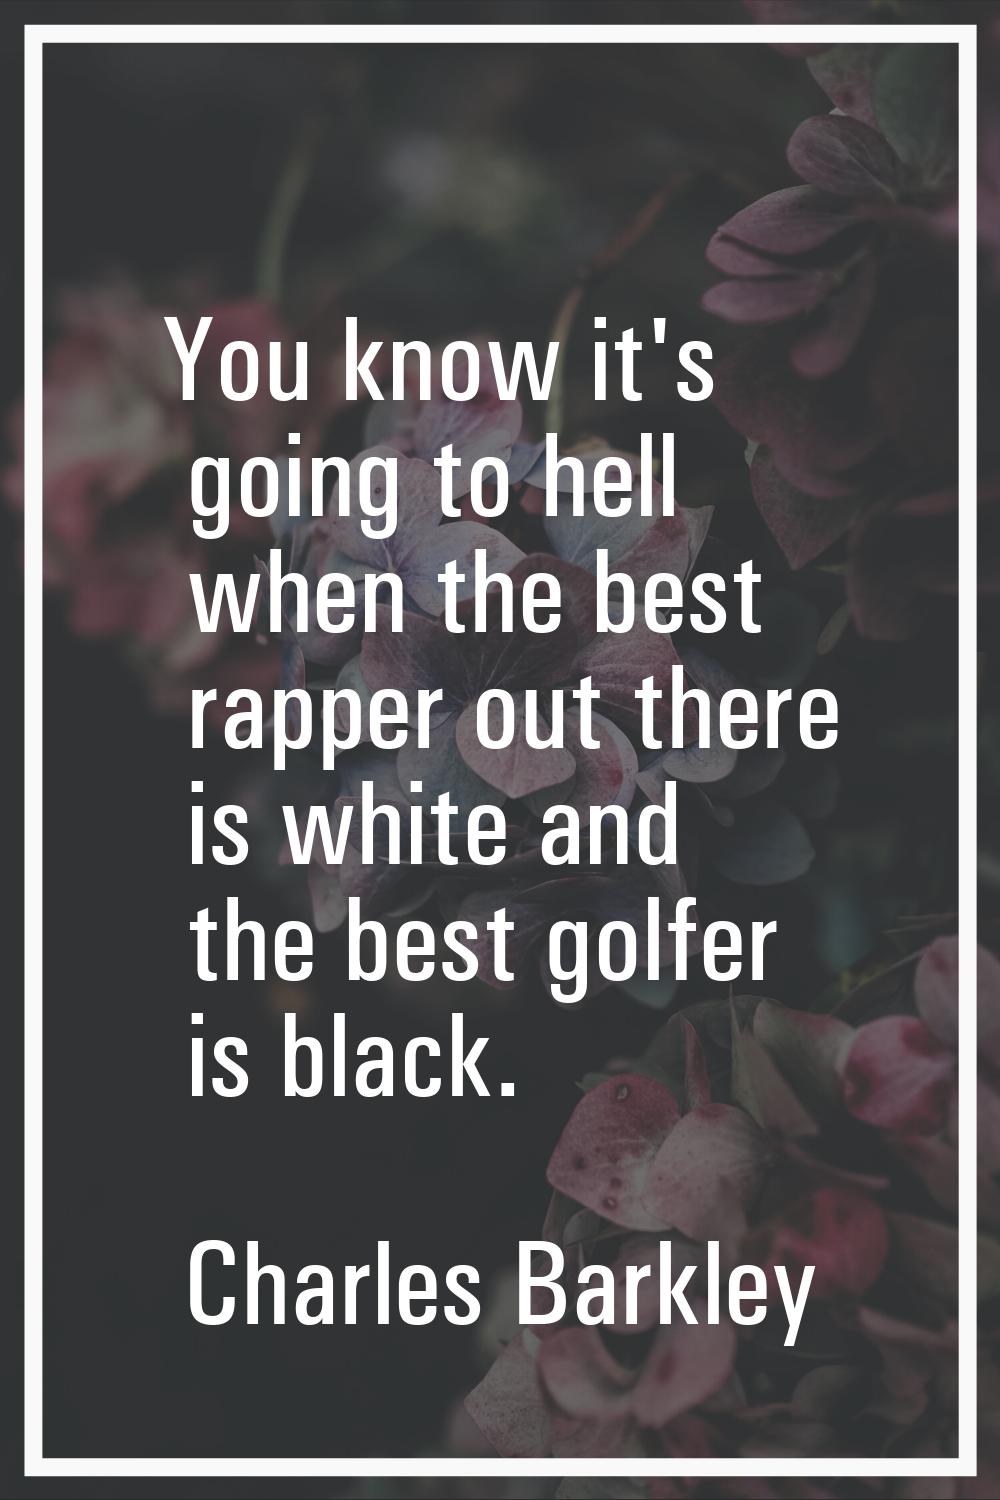 You know it's going to hell when the best rapper out there is white and the best golfer is black.